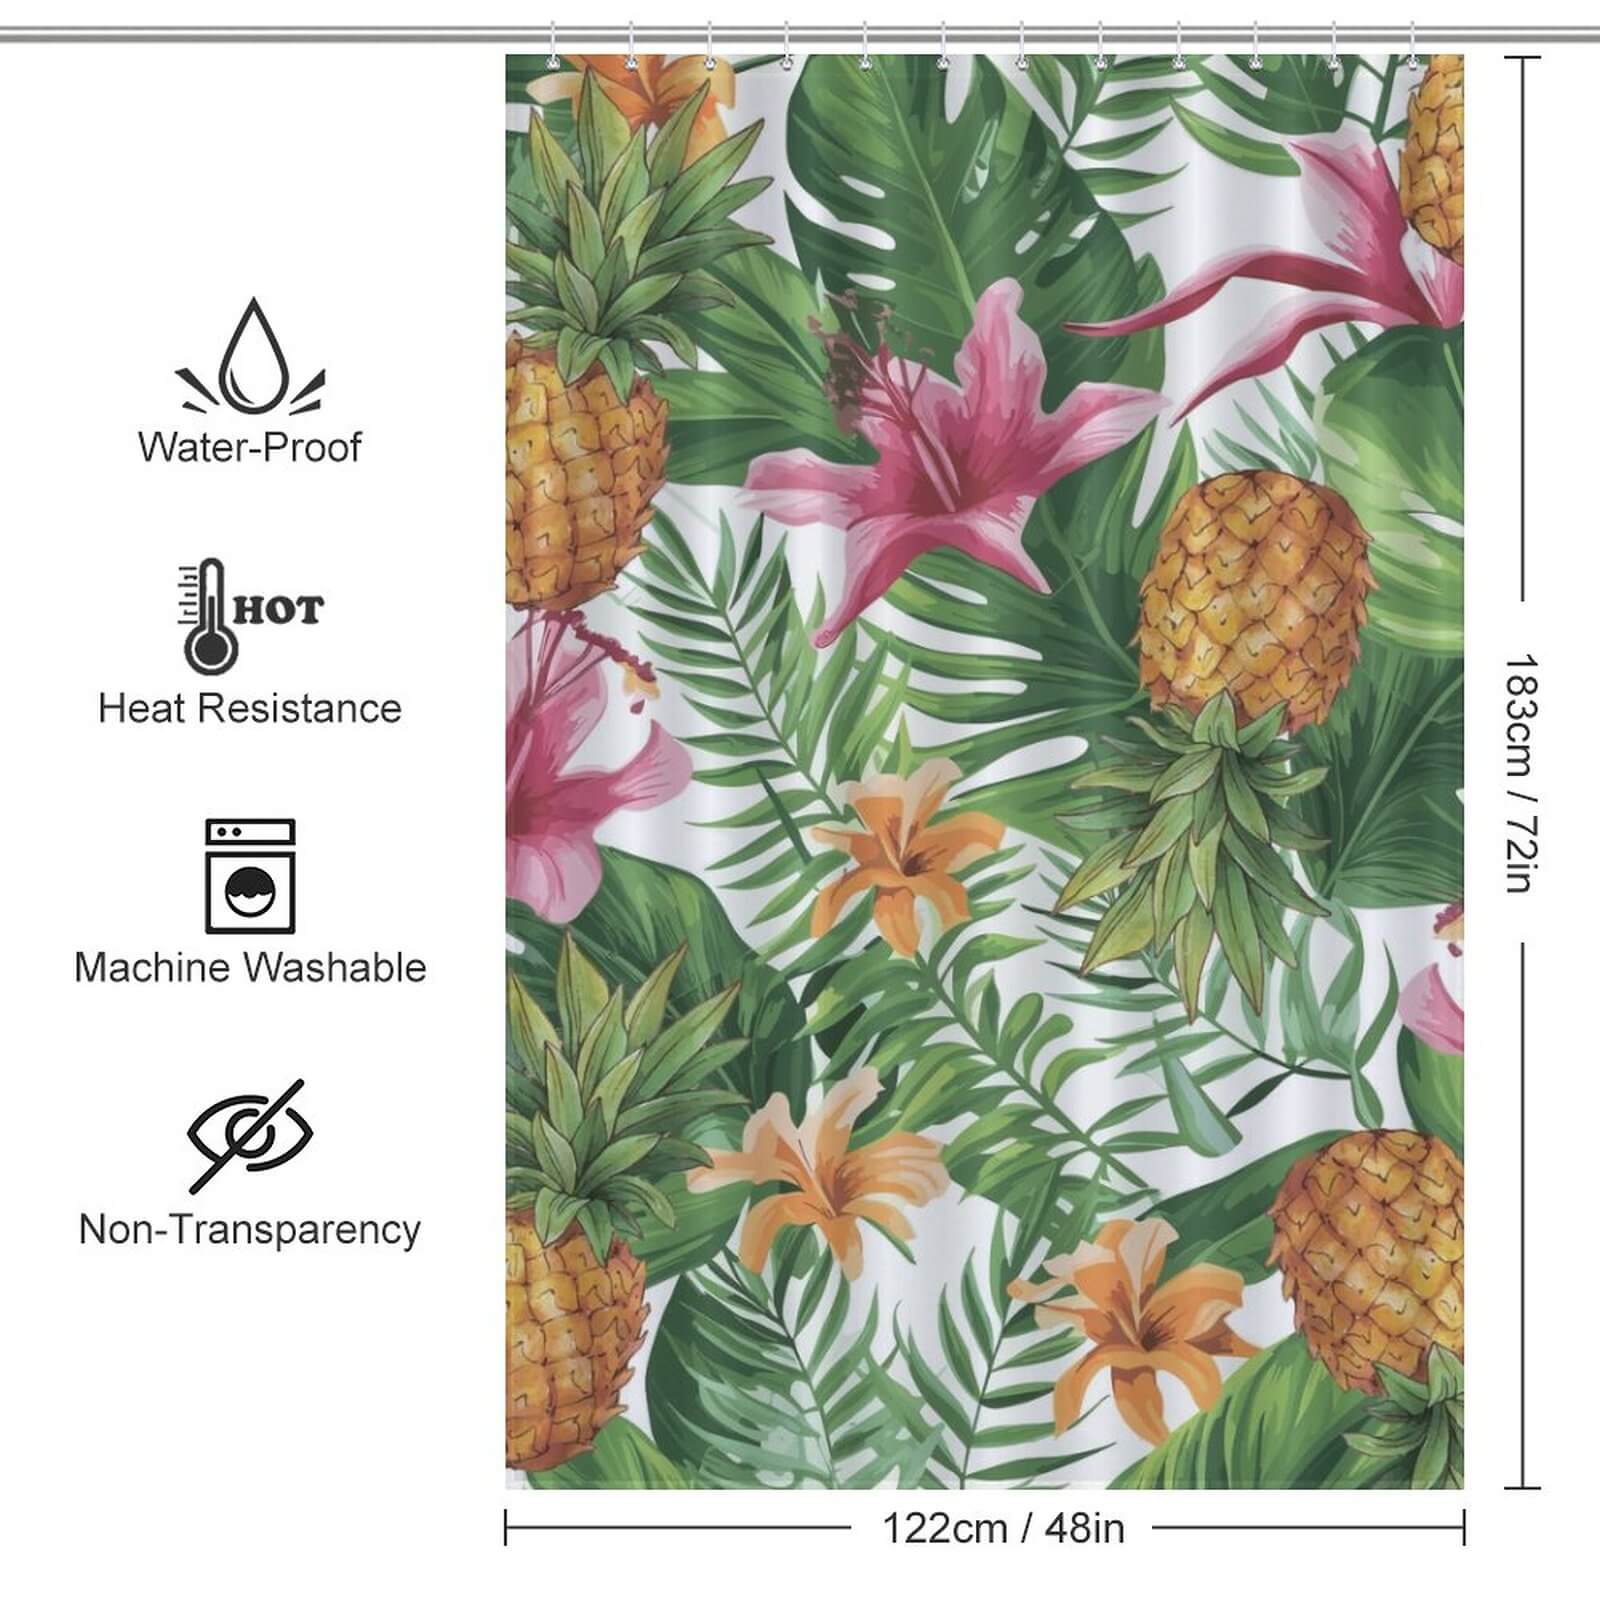 Transform your bathroom into a tropical oasis with the Tropical Pineapple Shower Curtain-Cottoncat by Cotton Cat. Featuring vibrant pineapples and lilies, it's the perfect piece to enhance your bathroom decor.